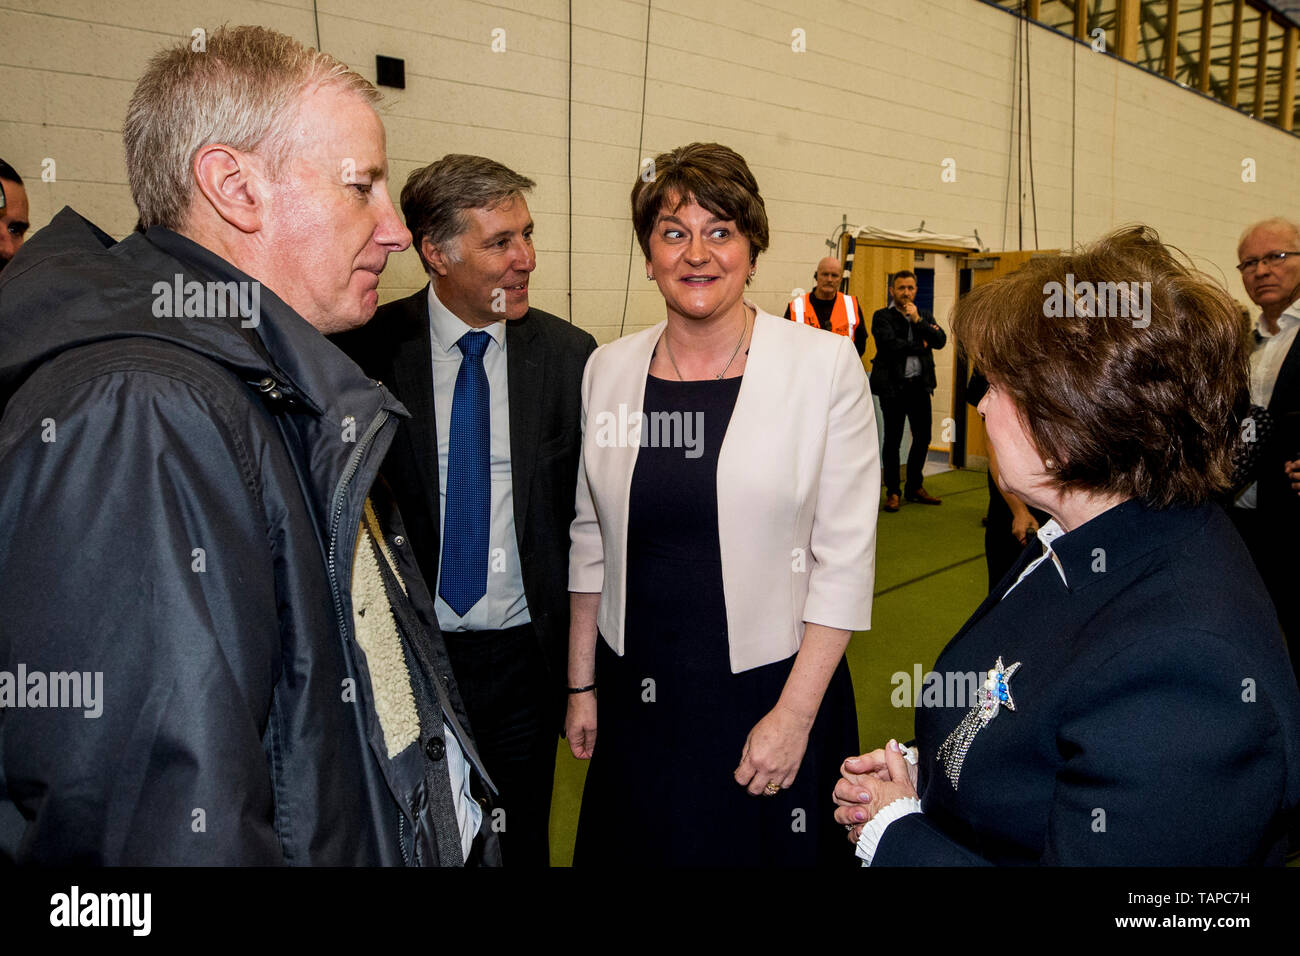 (left to right) DUP Gregory Campbell MP, DUP Paul Girvan MP, DUP leader Arlene Foster MLA and DUP candidate Diane Dodds at the European Parliamentary elections count at the Meadowbank Sports Arena in Magherafelt, Northern Ireland, as counting has begun in the race for Northern Ireland’s three European Parliament seats. Stock Photo